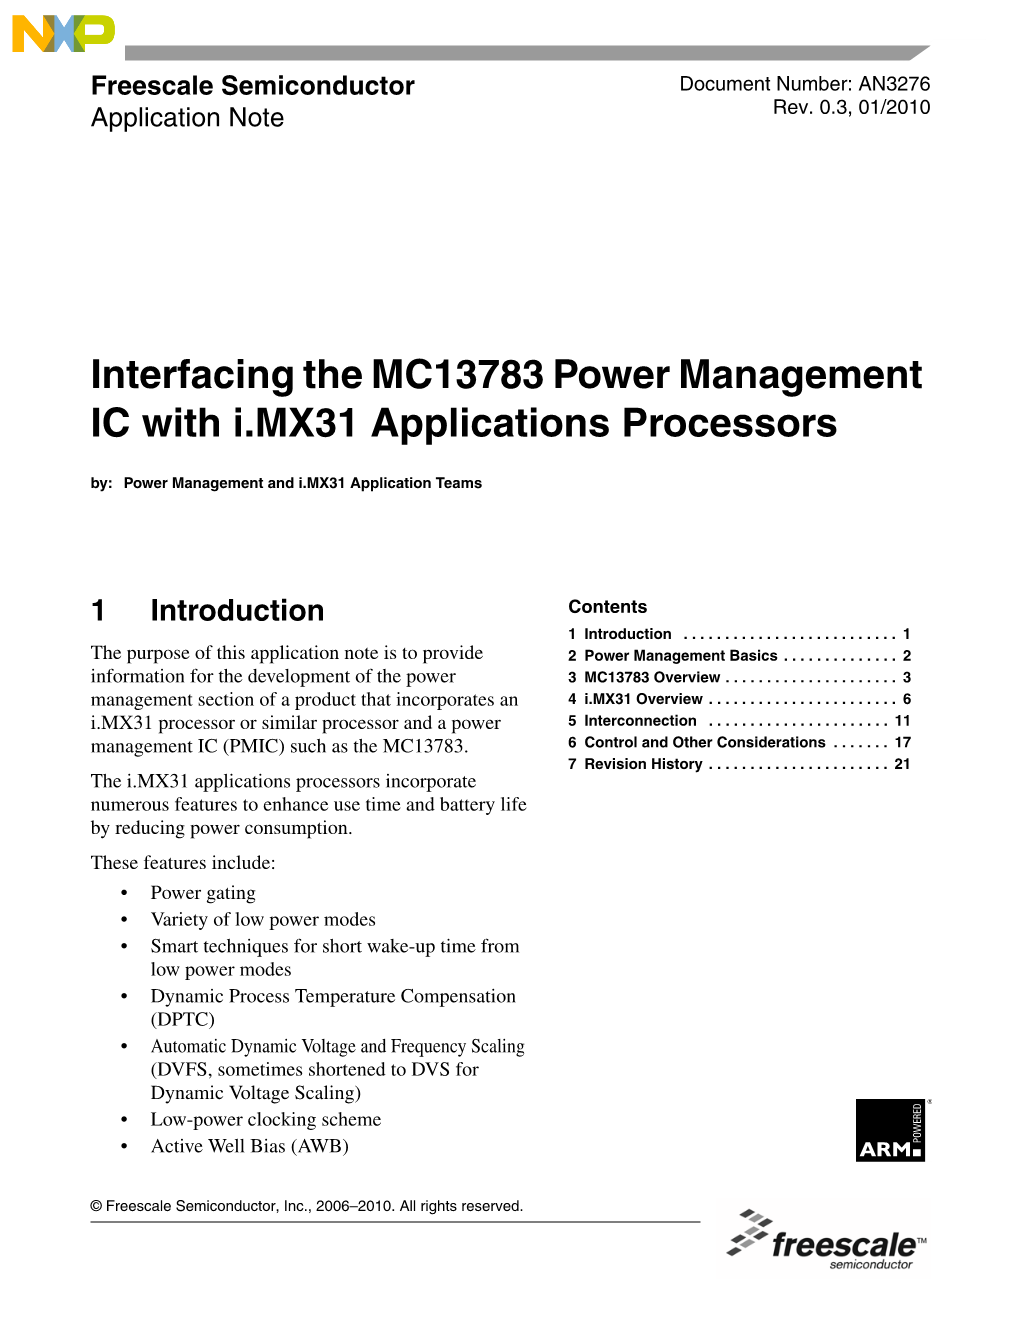 Interfacing the MC13783 Power Management IC with I.MX31 Applications Processors By: Power Management and I.MX31 Application Teams